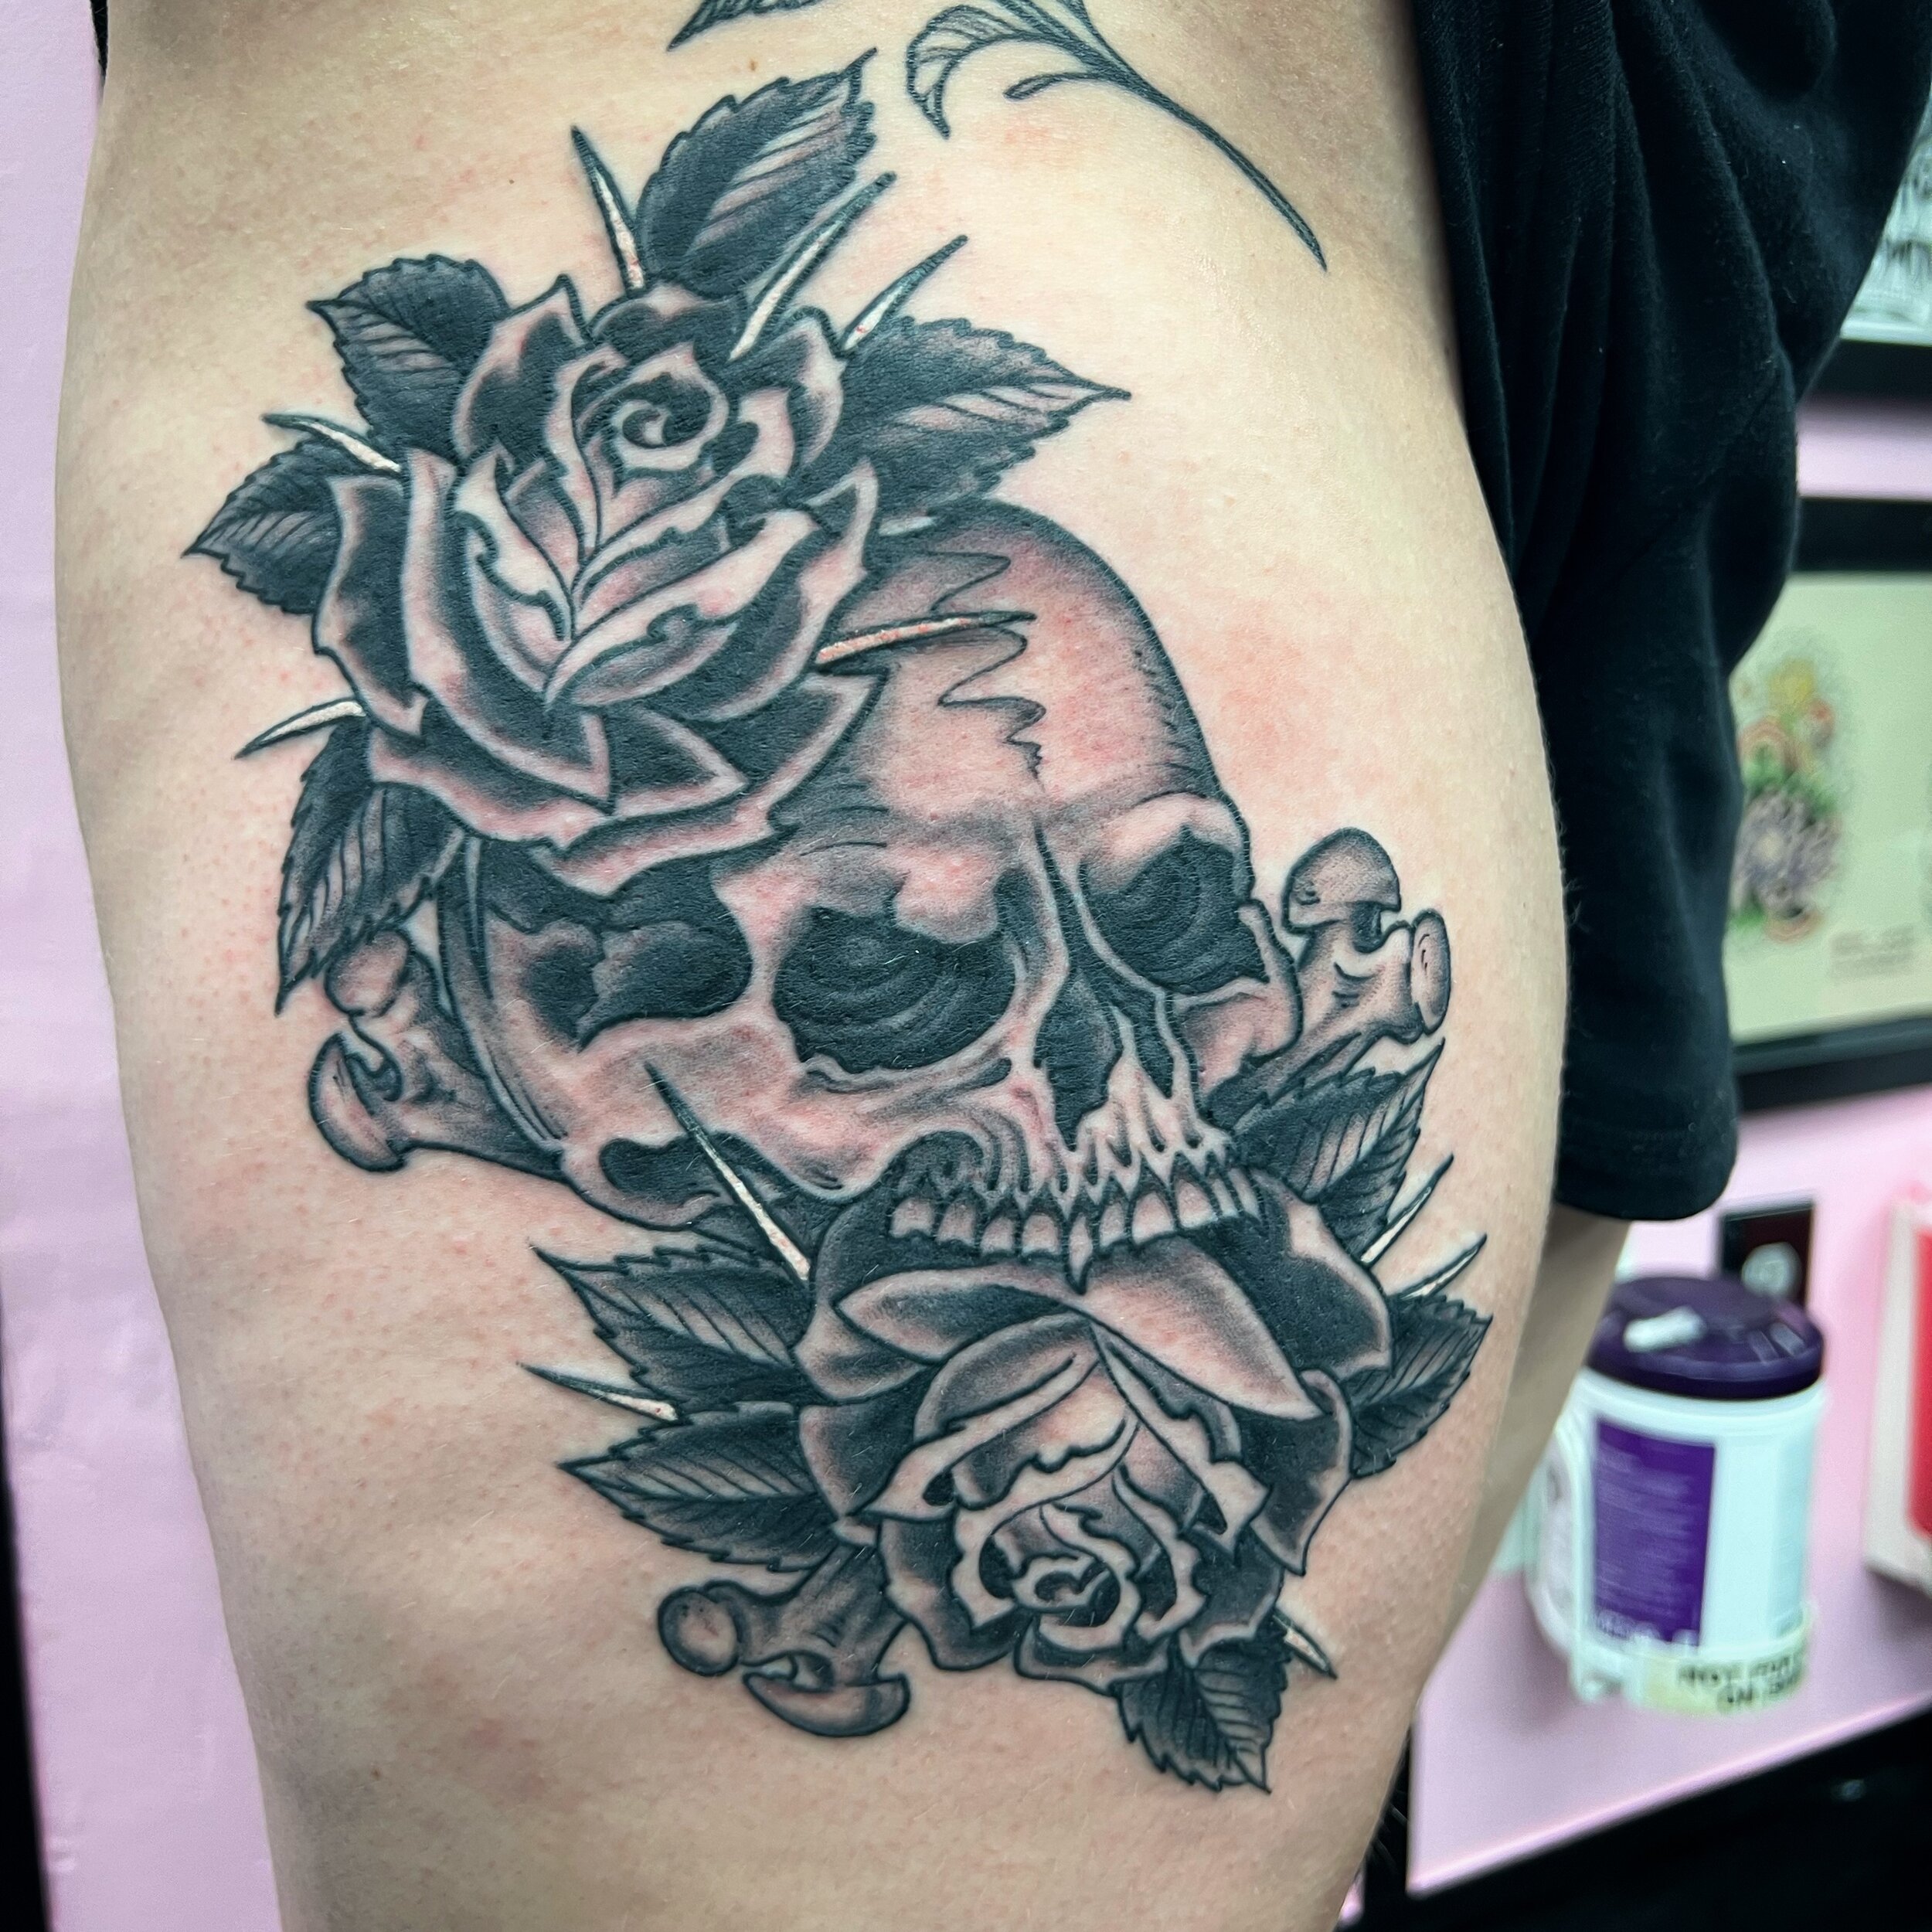 Tuesday - Saturday @inksmithandrogers_mandarin. Thanks for looking and thanks for getting tattooed!  For appointments email anthonylowtattoos@gmail.com or stop by the shop.